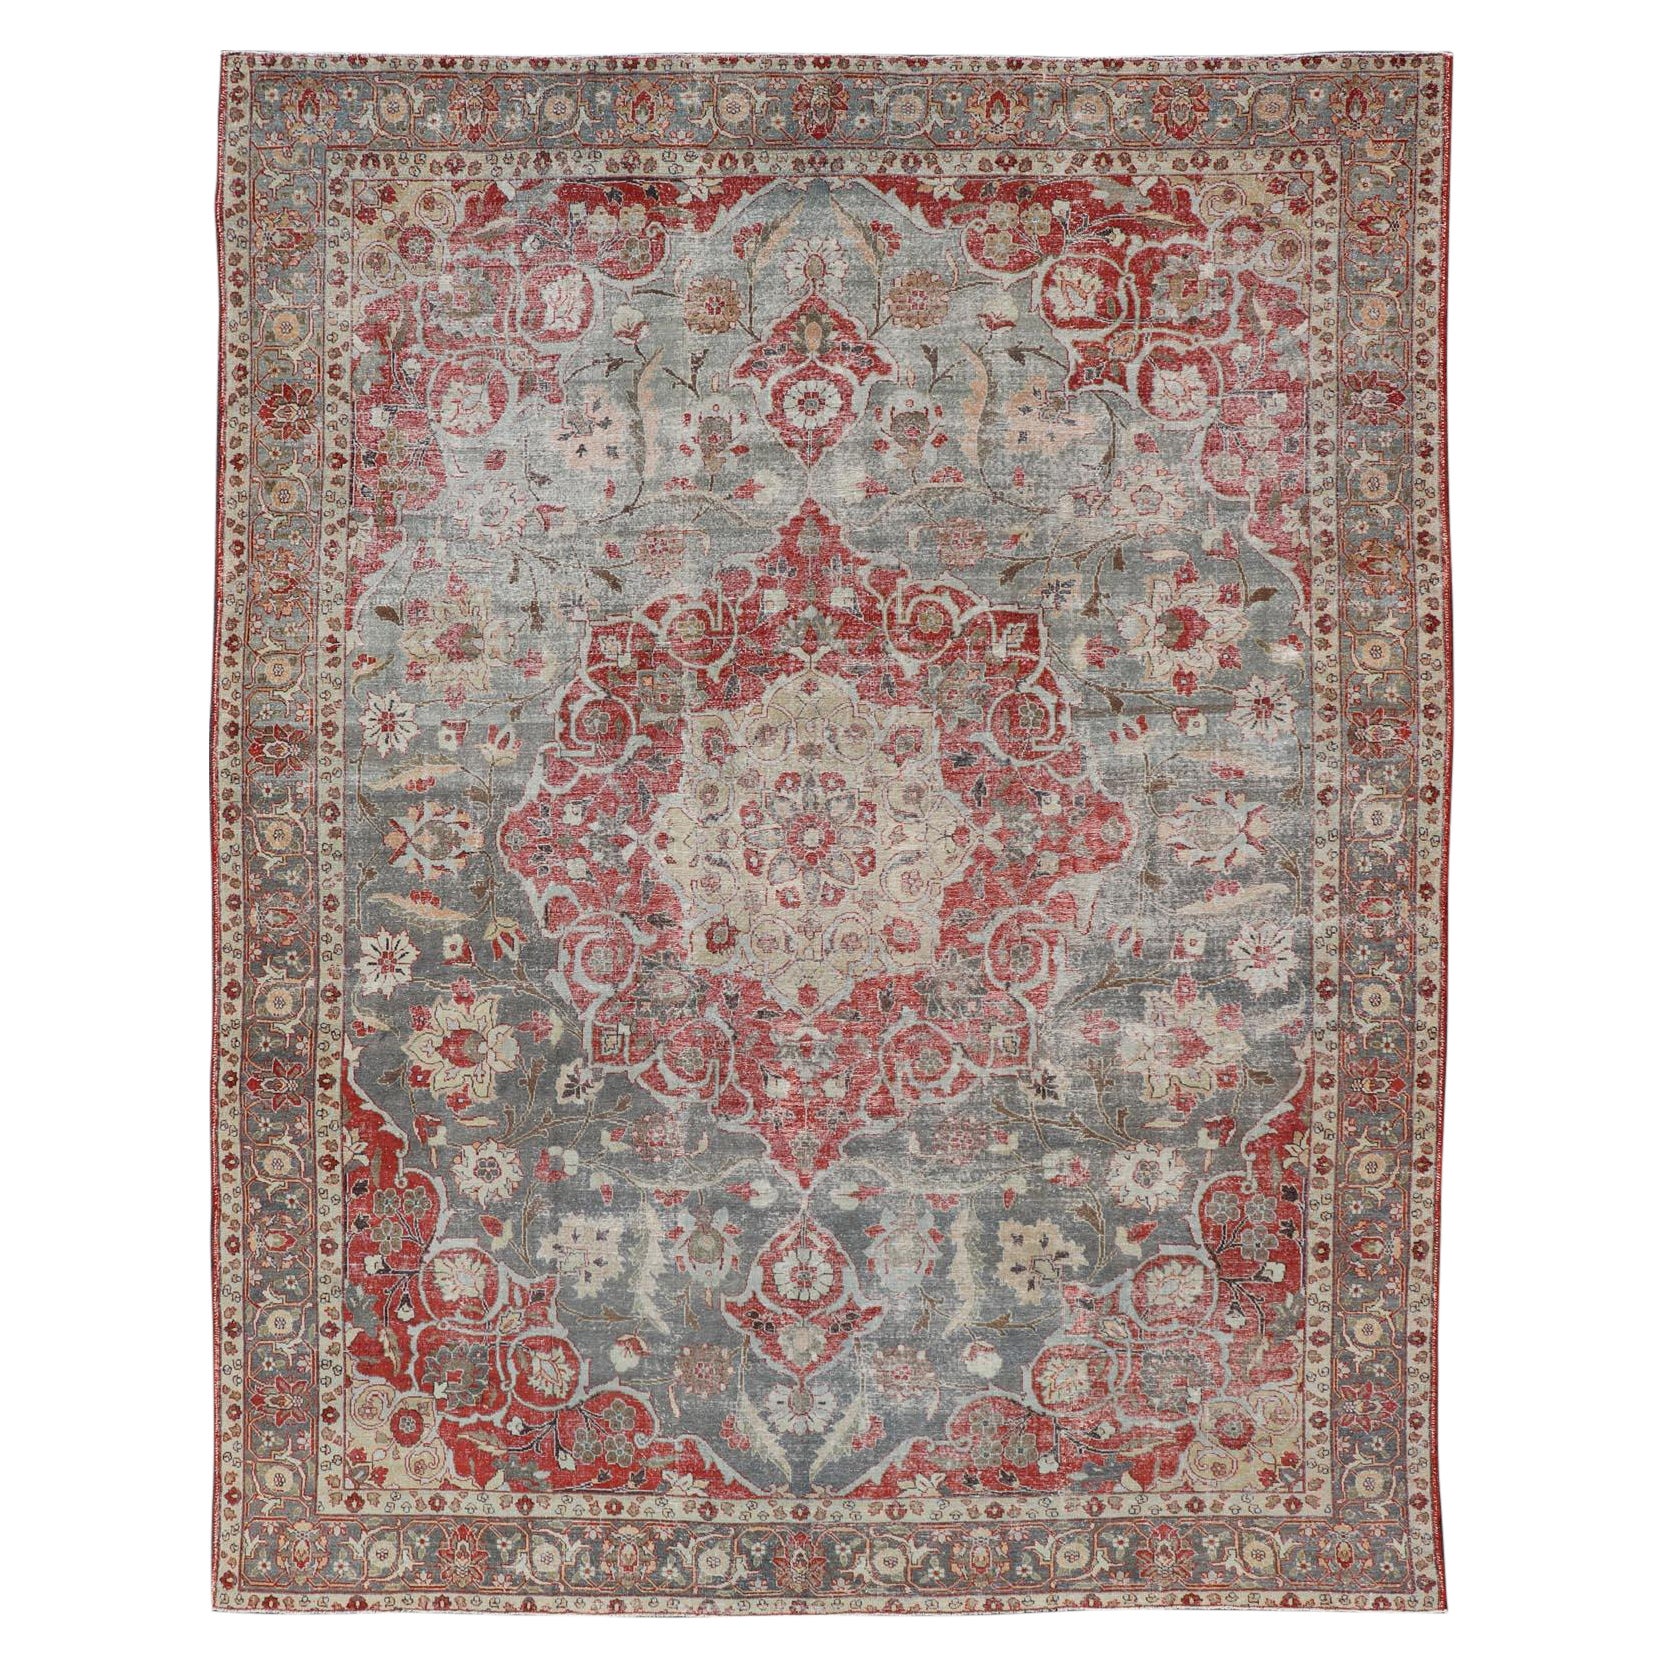 Antique Persian Tabriz Rug with Floral Medallion Design in Tan, Red, and Lt Blue For Sale